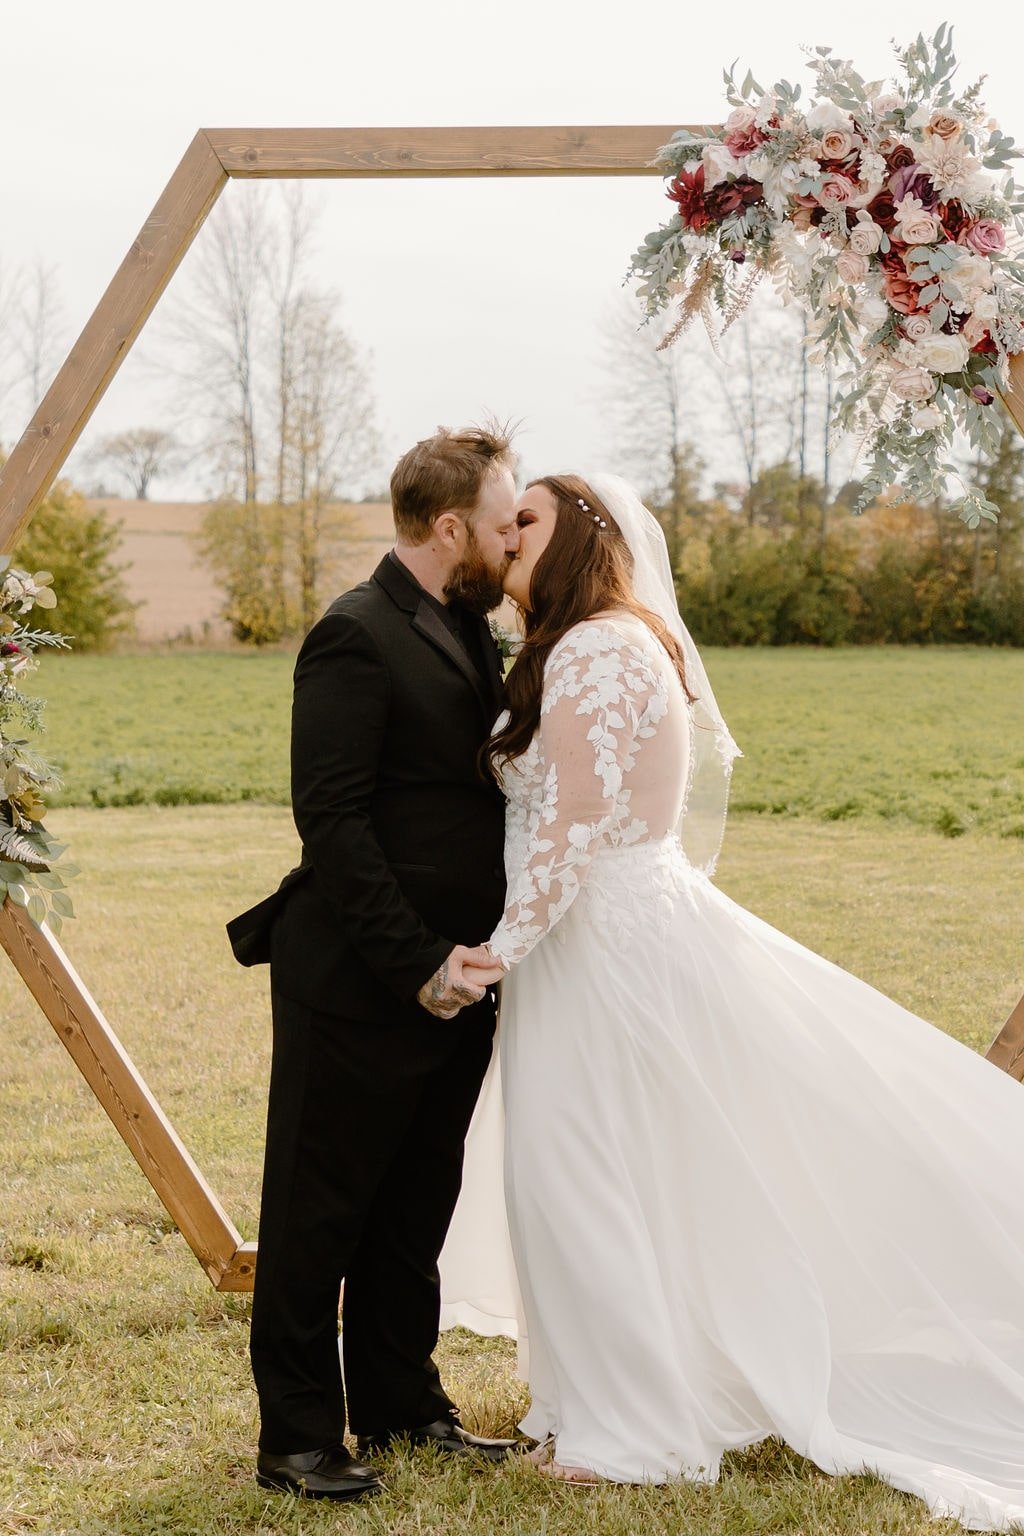 Couple kissing in front of hexagon wood wedding arch